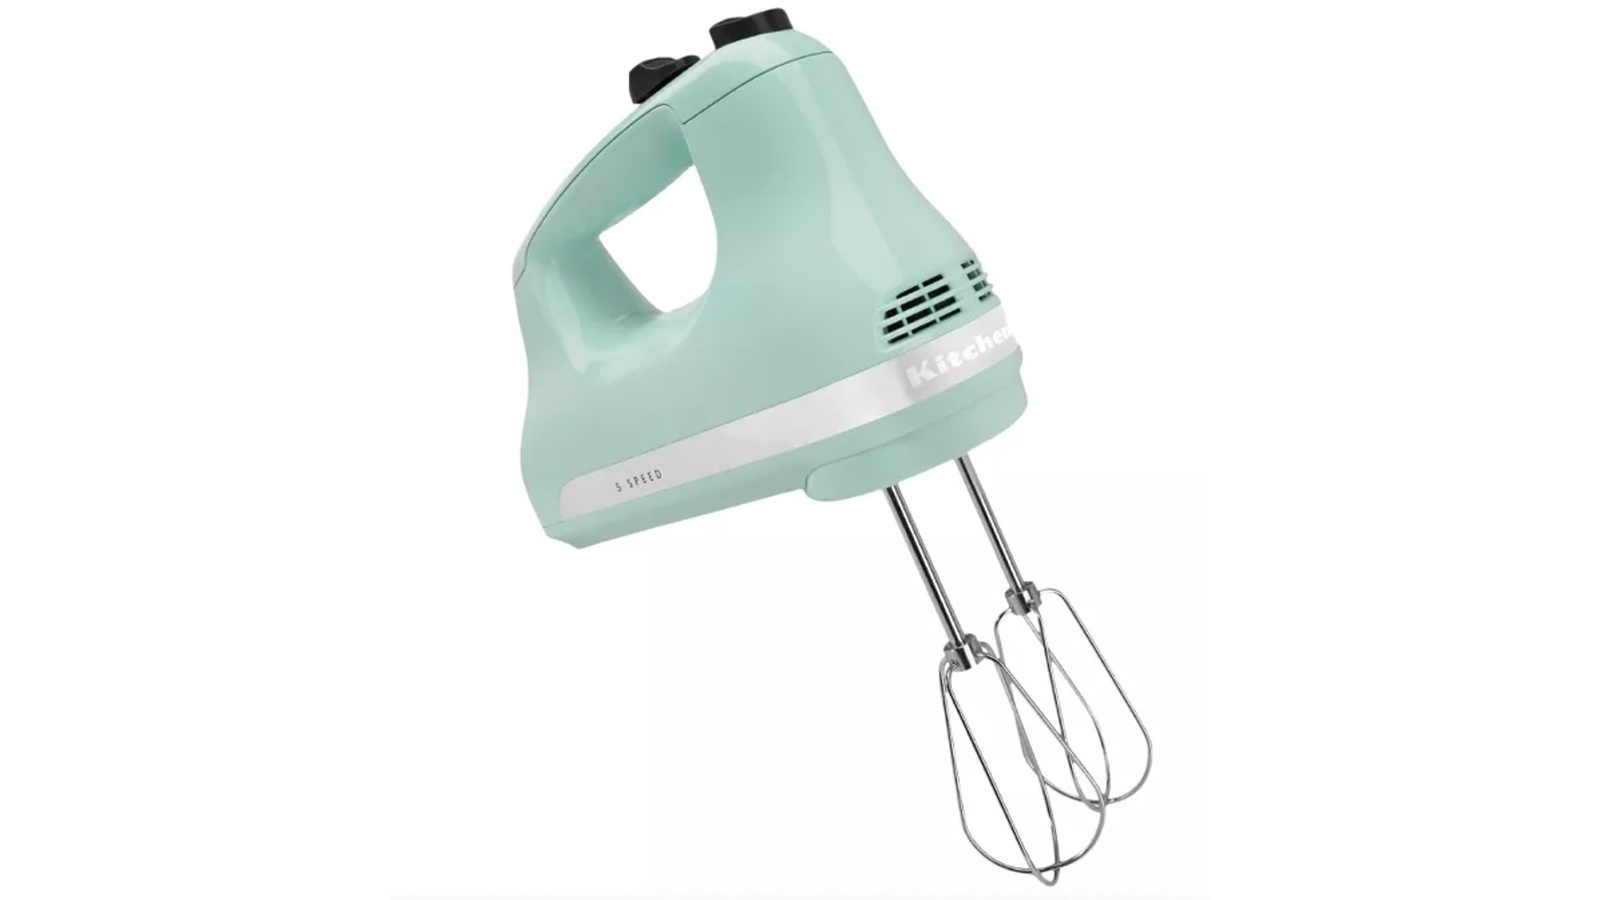 400W 5 Speeds with Turbo Handheld Kitchen Mixer with Egg Beaters Dough Hook for Baking Cake Cookies 2 in 1 Stand Hand Electric Mixer